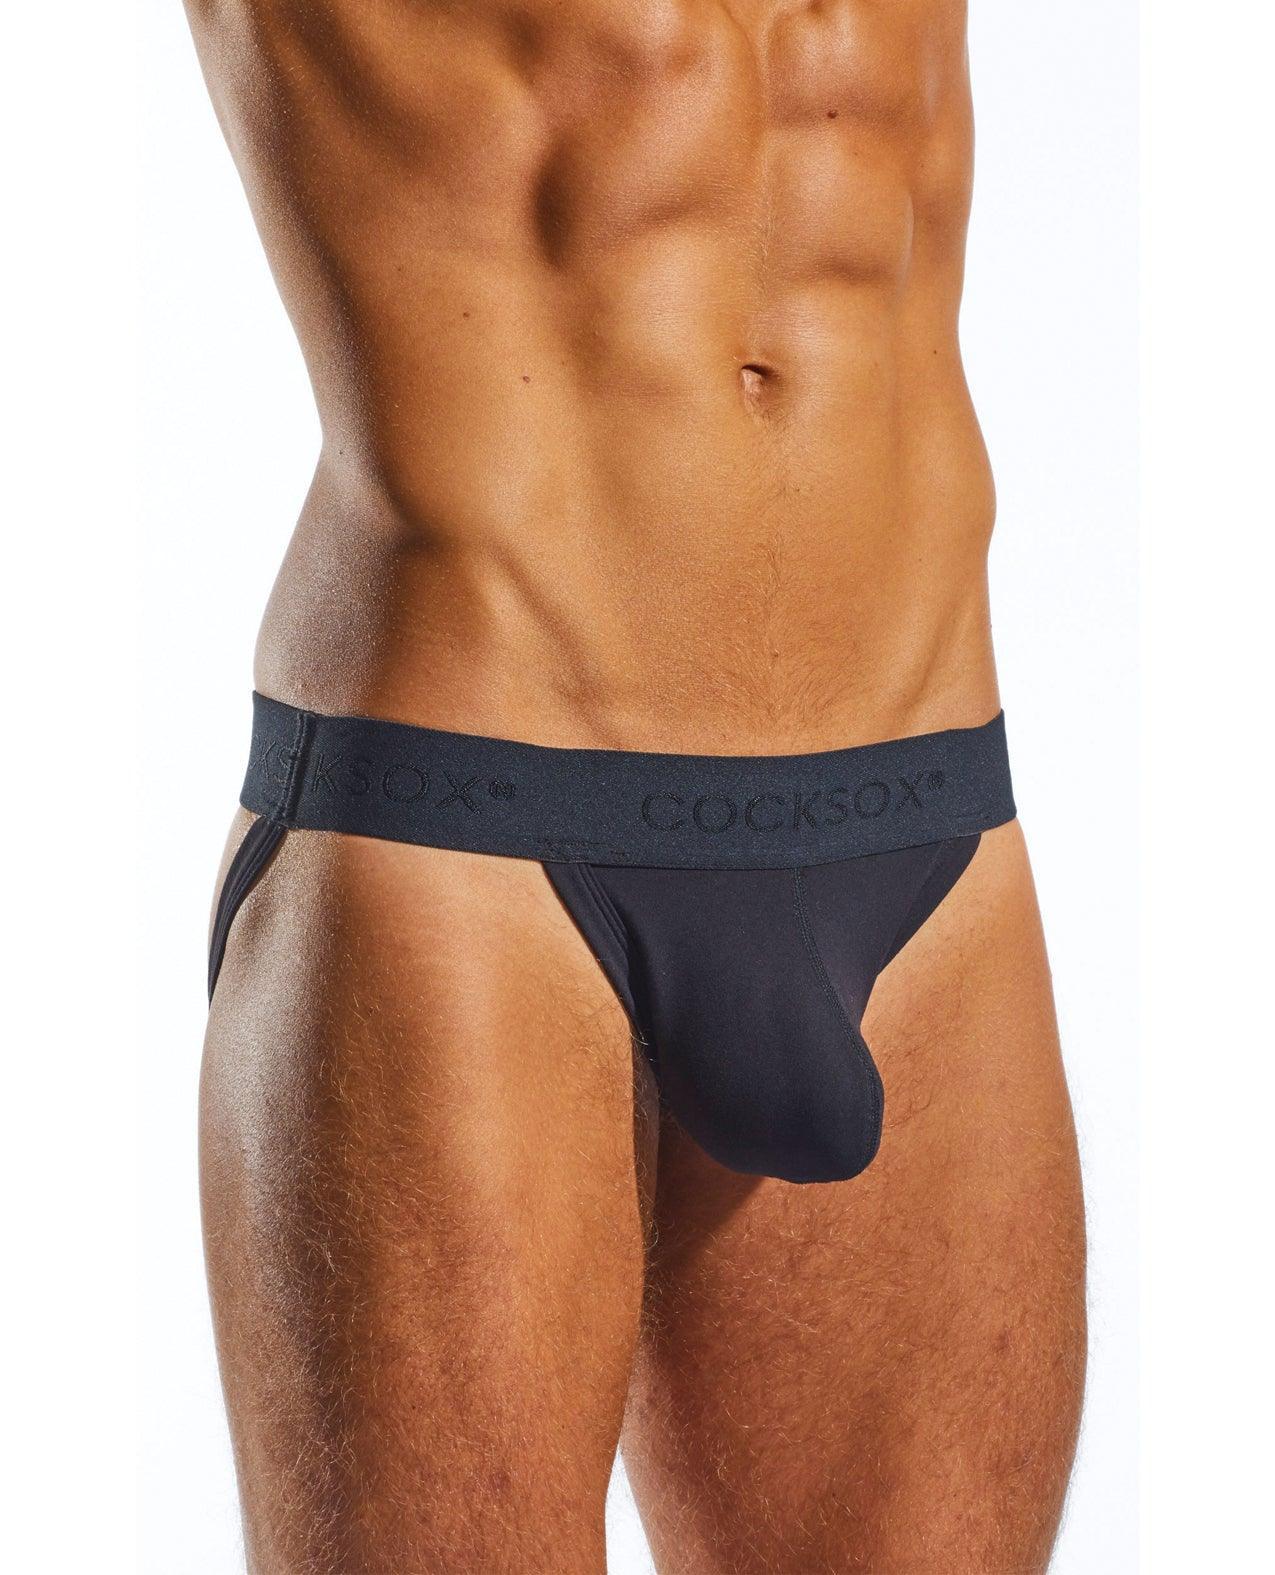 image of product,Cocksox Enhancing Pouch Jockstrap - SEXYEONE